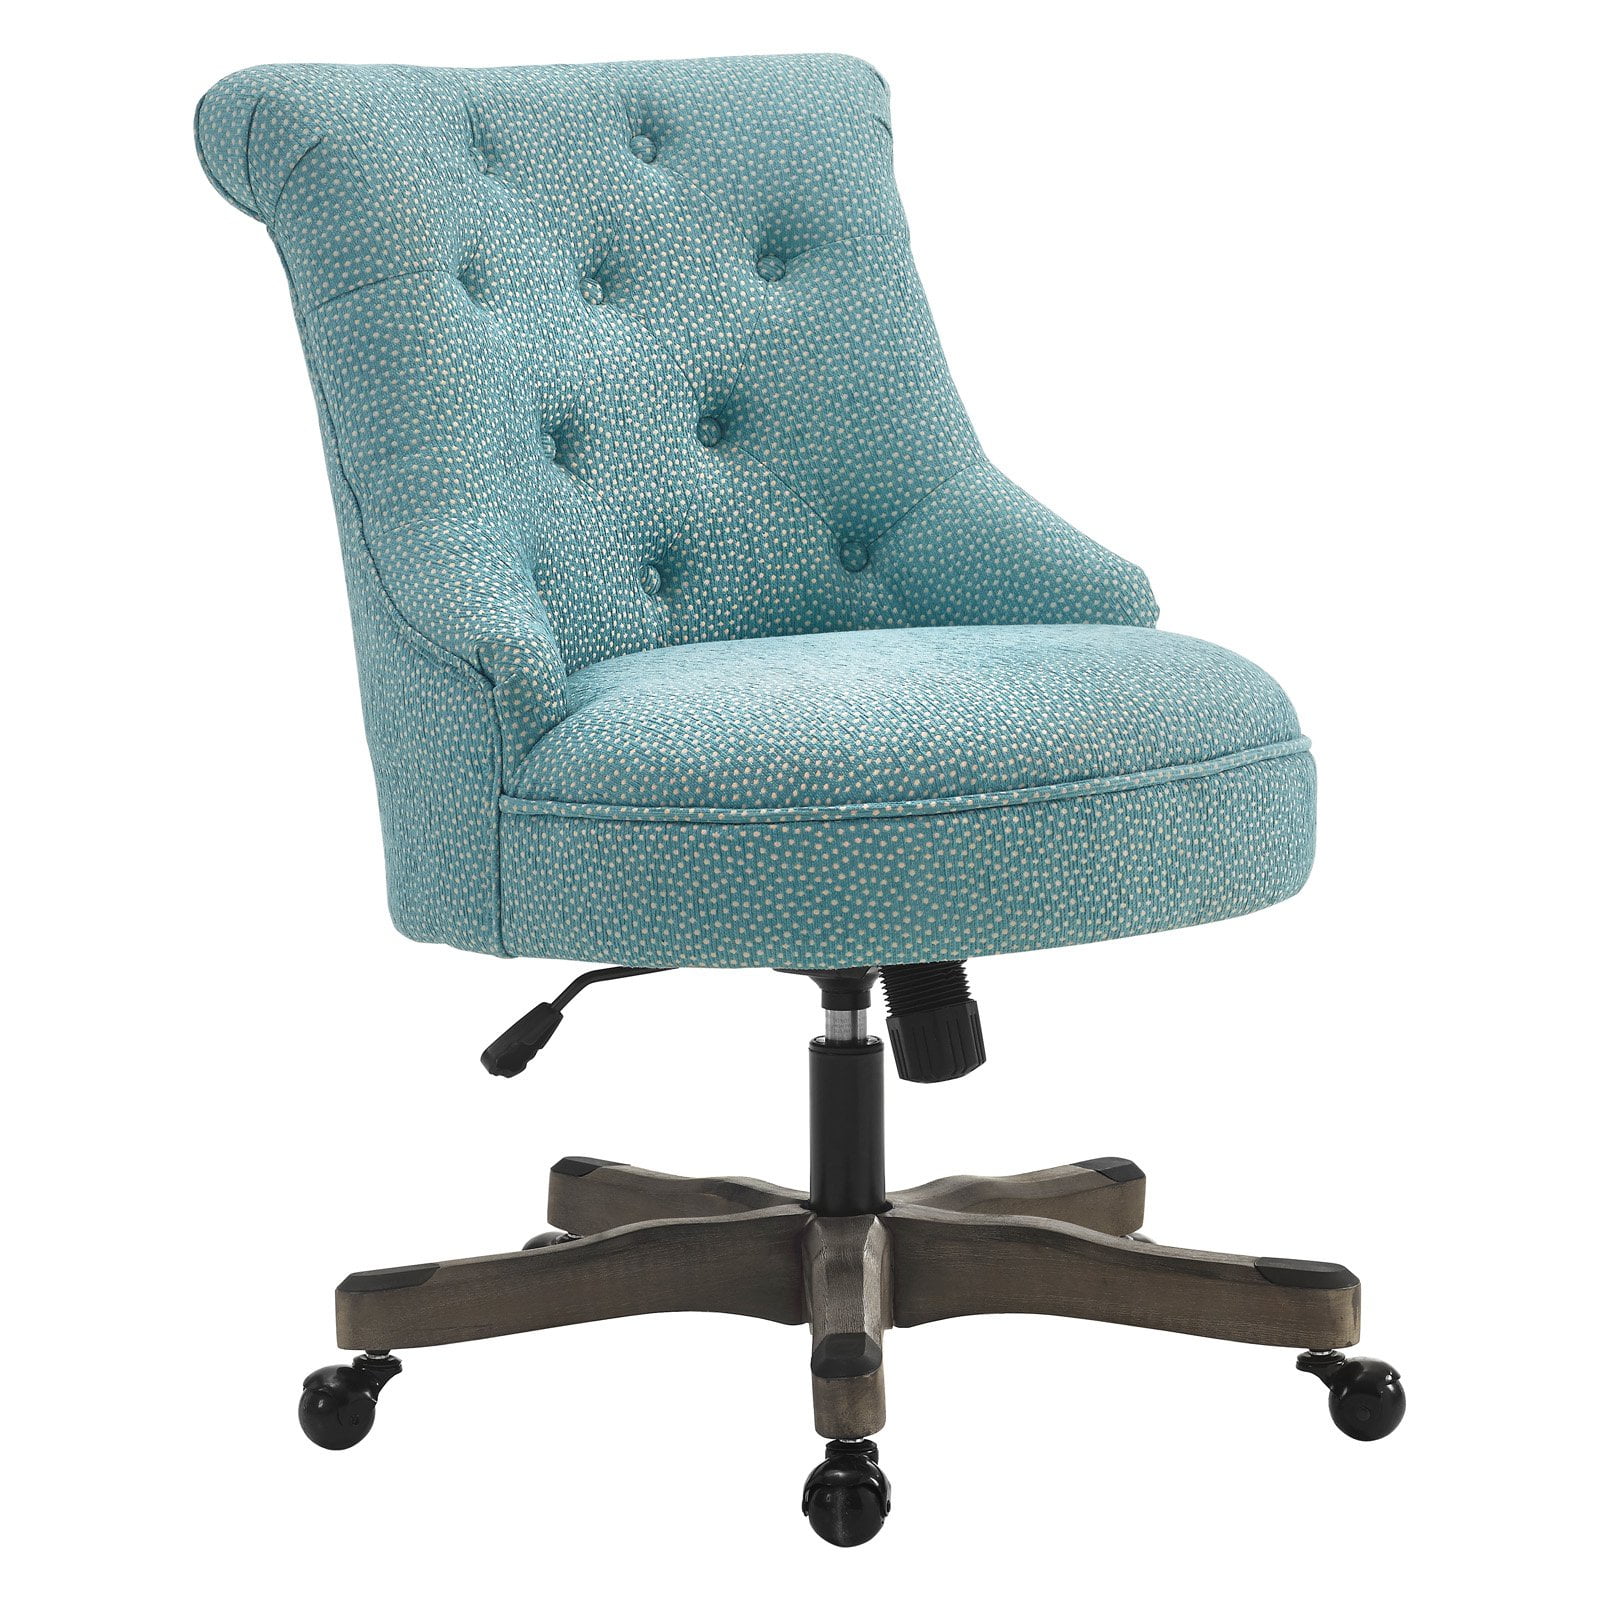 Executive Office Chair Blue Upholstered Armless Wood Base ...